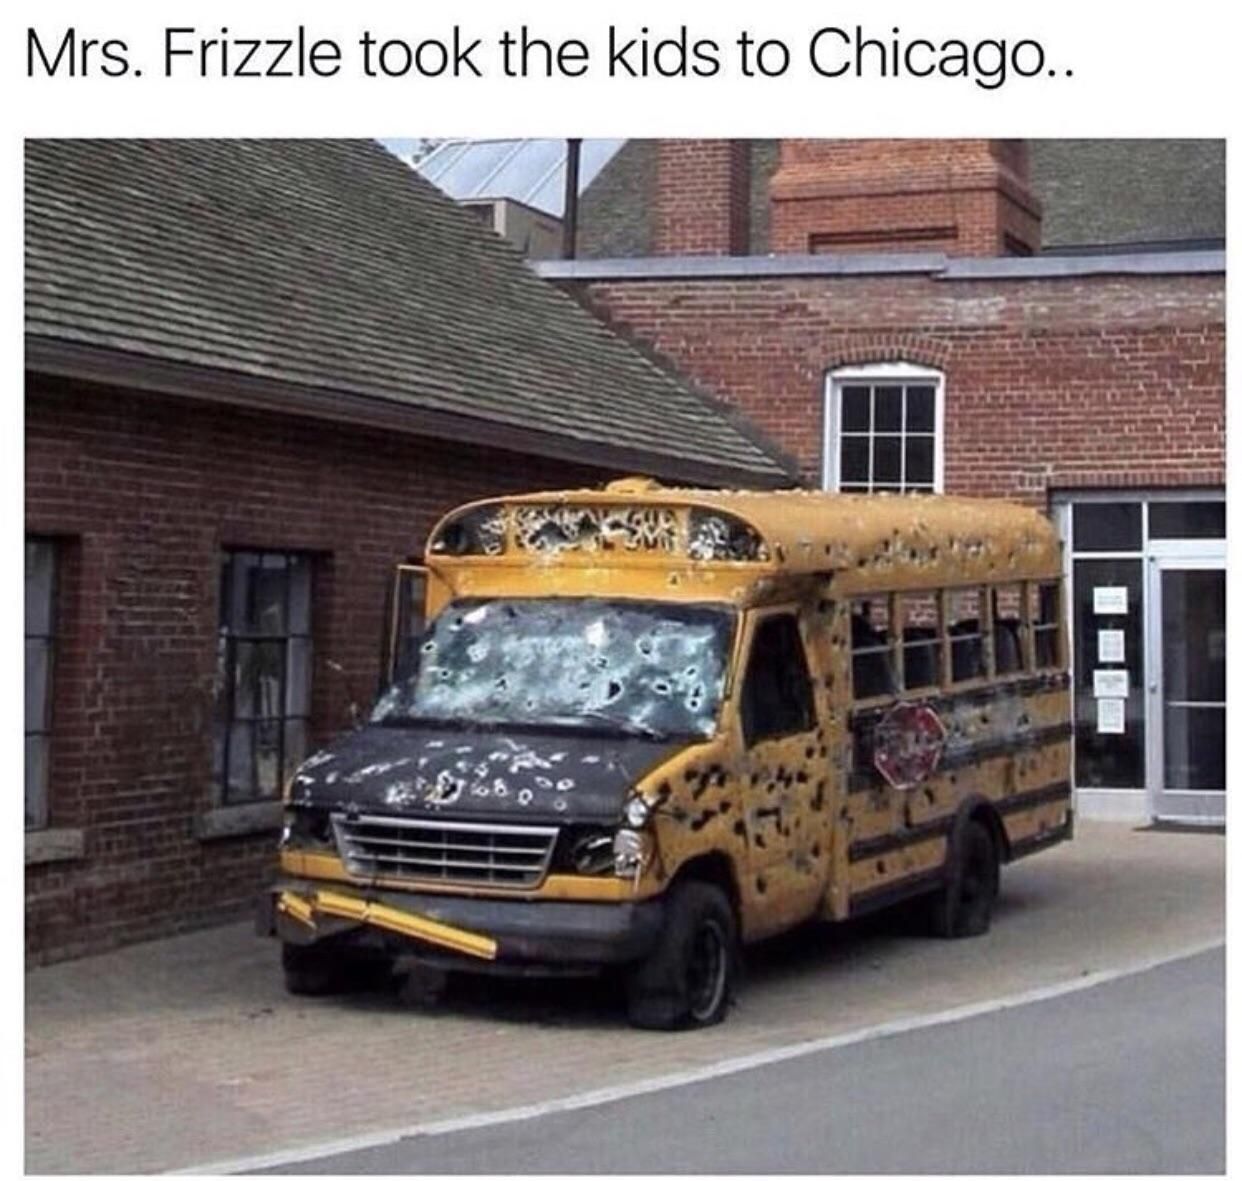 Mrs. Frizzle took the kids to Chicago...